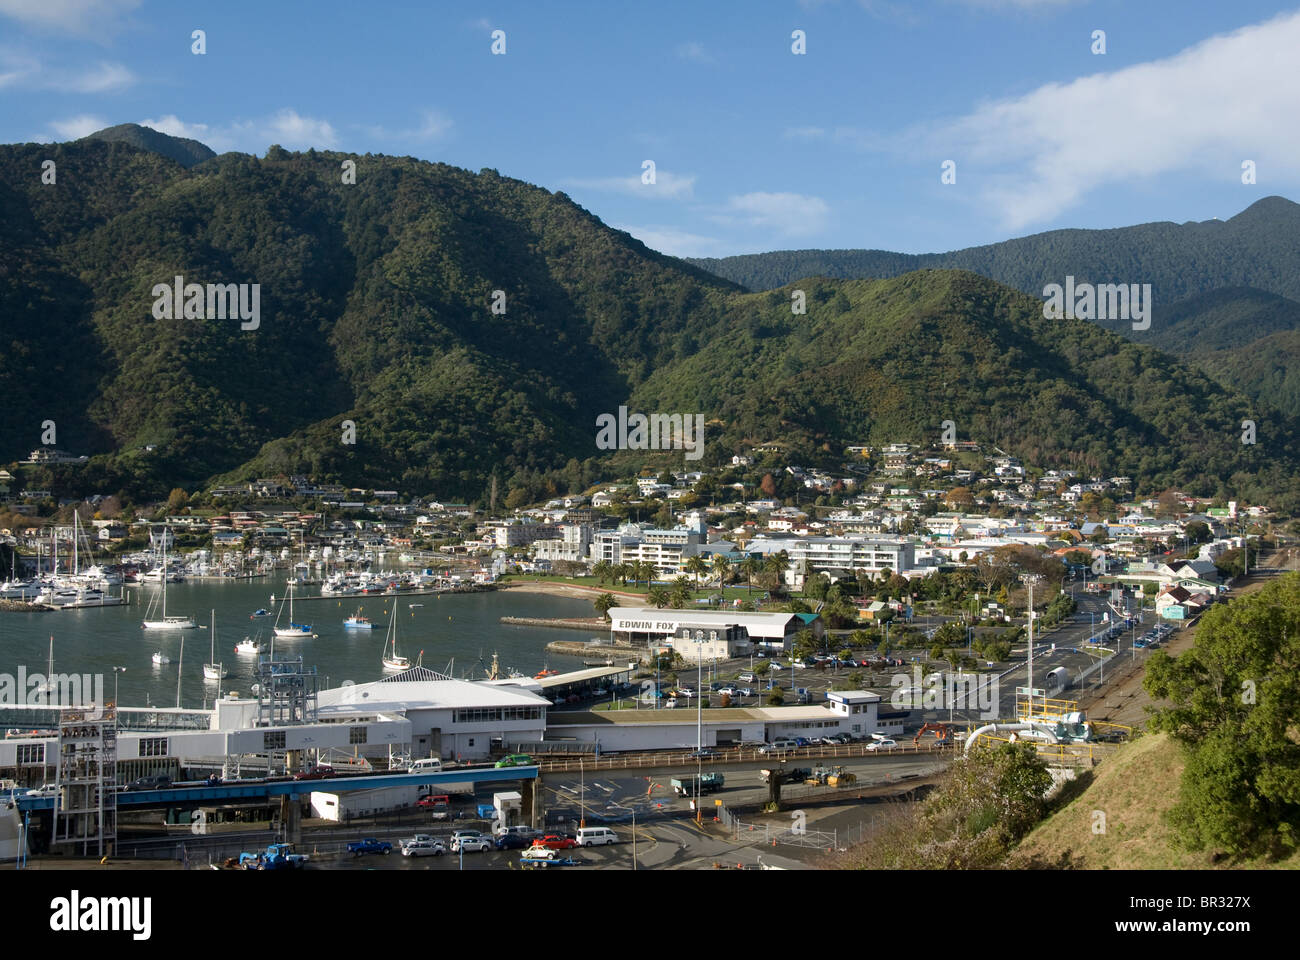 Town and harbour, Picton, Queen Charlotte Sound, Marlborough Sounds, South Island, New Zealand Stock Photo